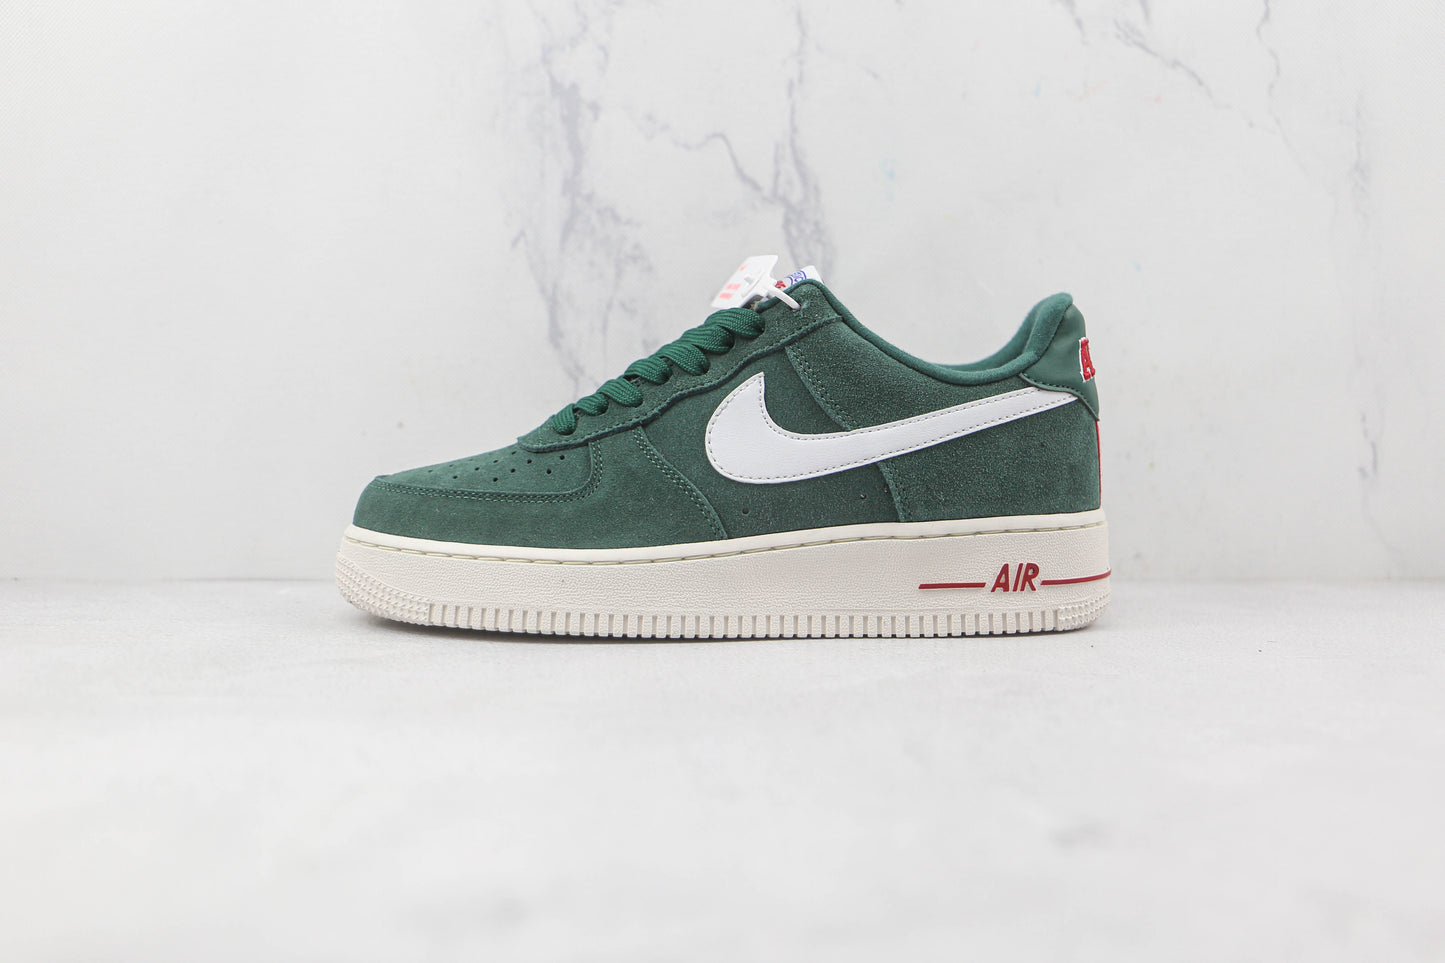 Nike Air Force 1 Athletic Club Pro Green